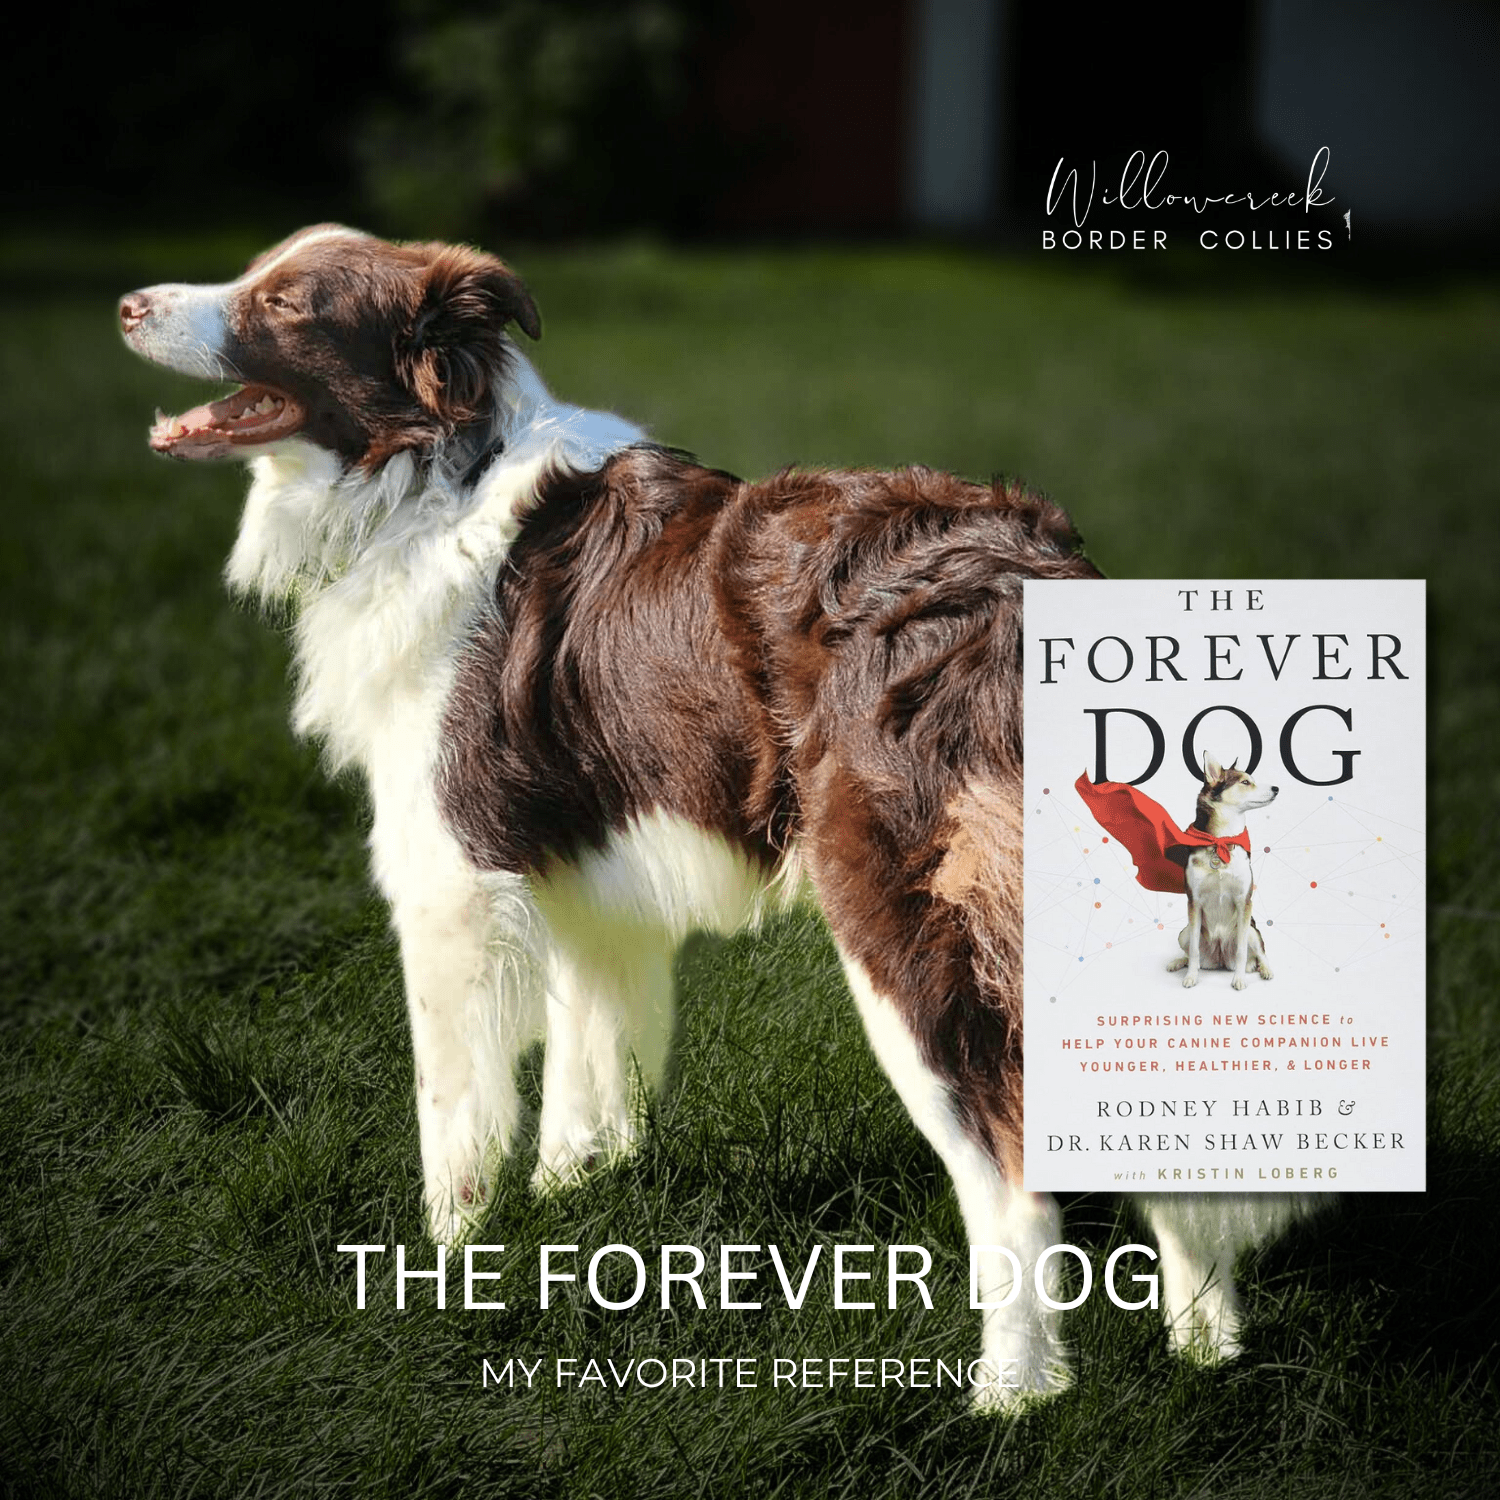 The Forever Dog | #1 Reference Recommendation